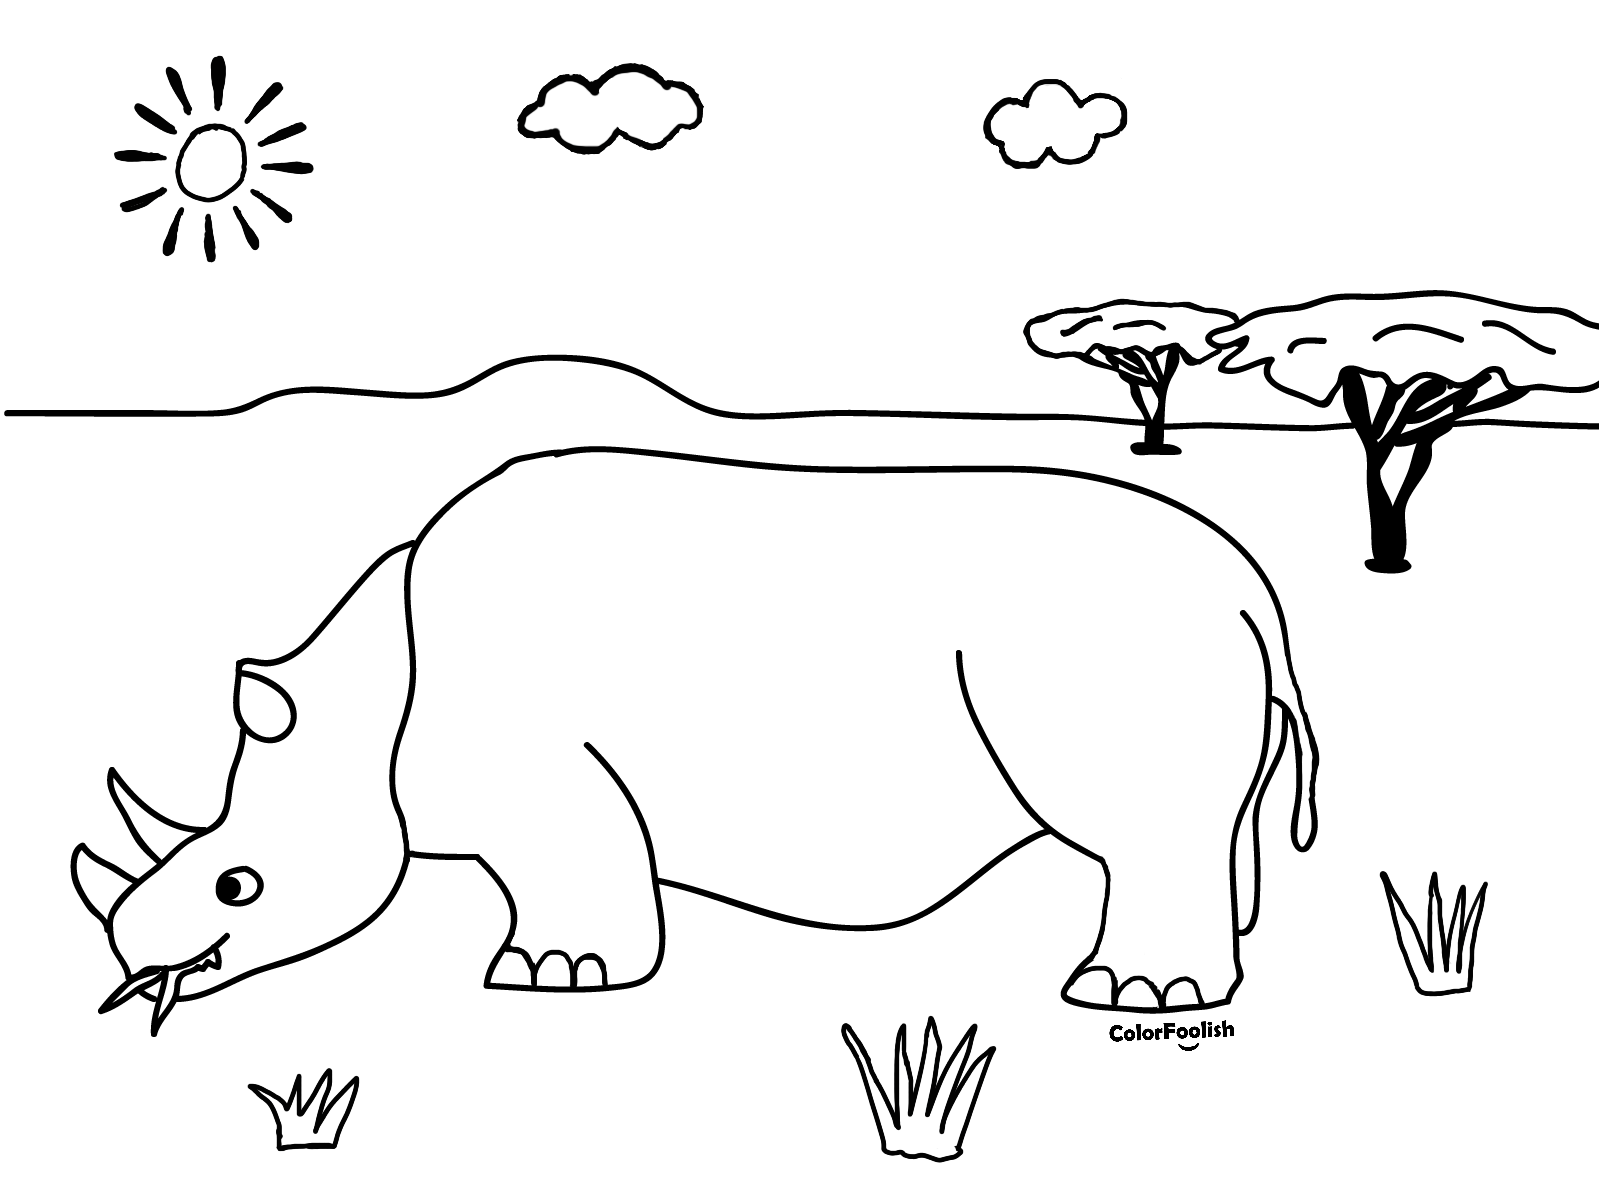 Coloring page of a rhino eating on the savanna